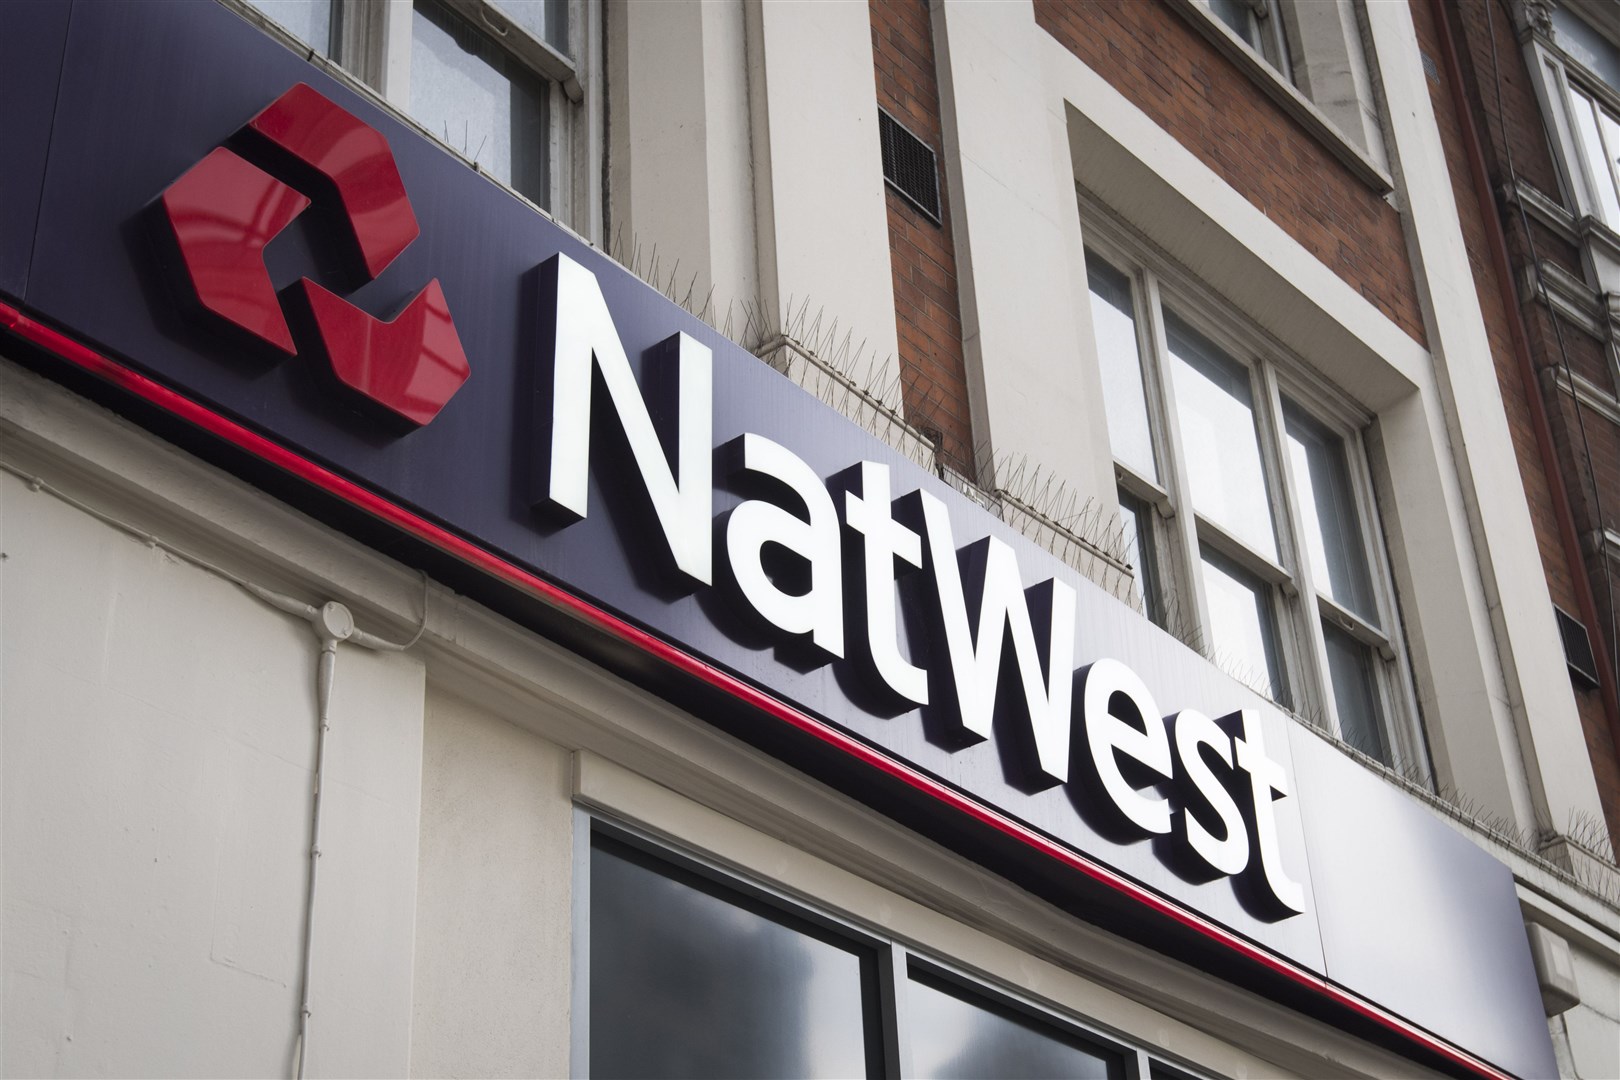 NatWest Group, which owns Coutts, was shaken by the debanking saga last year involving Nigel Farage (Matt Crossick/PA)